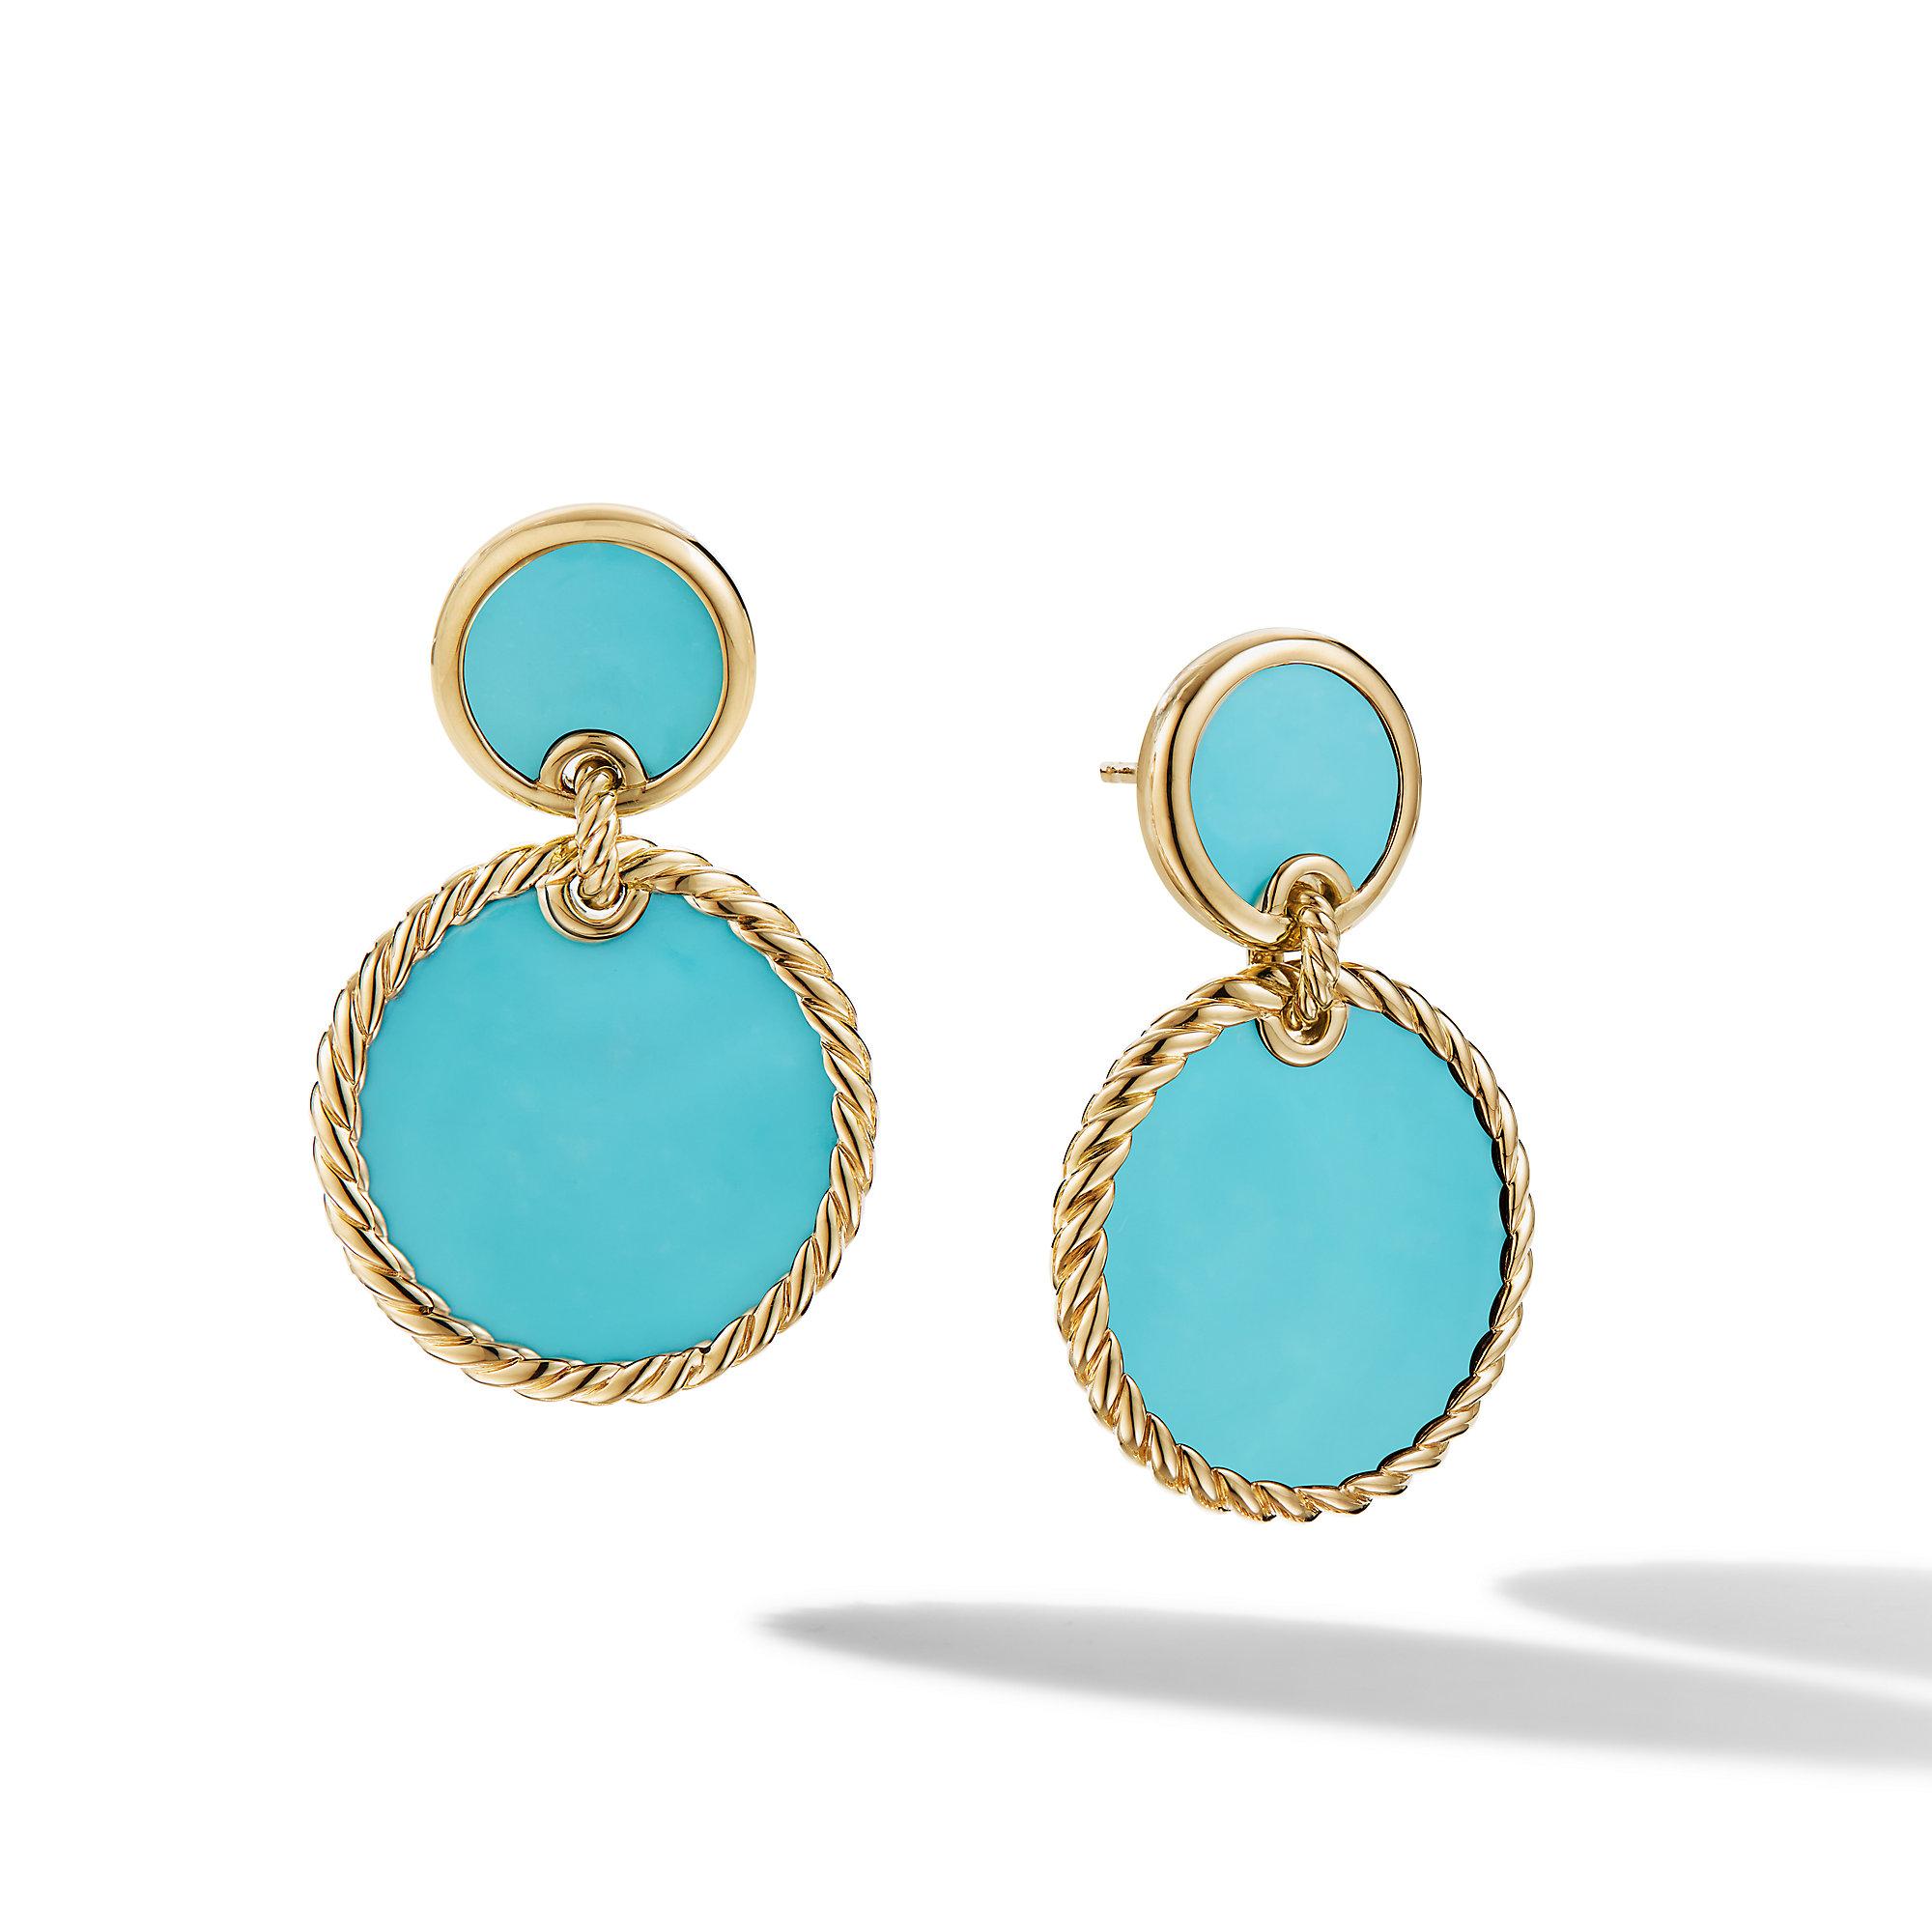 David Yurman DY Elements Double Drop Earrings in 18k Yellow Gold with Turquoise